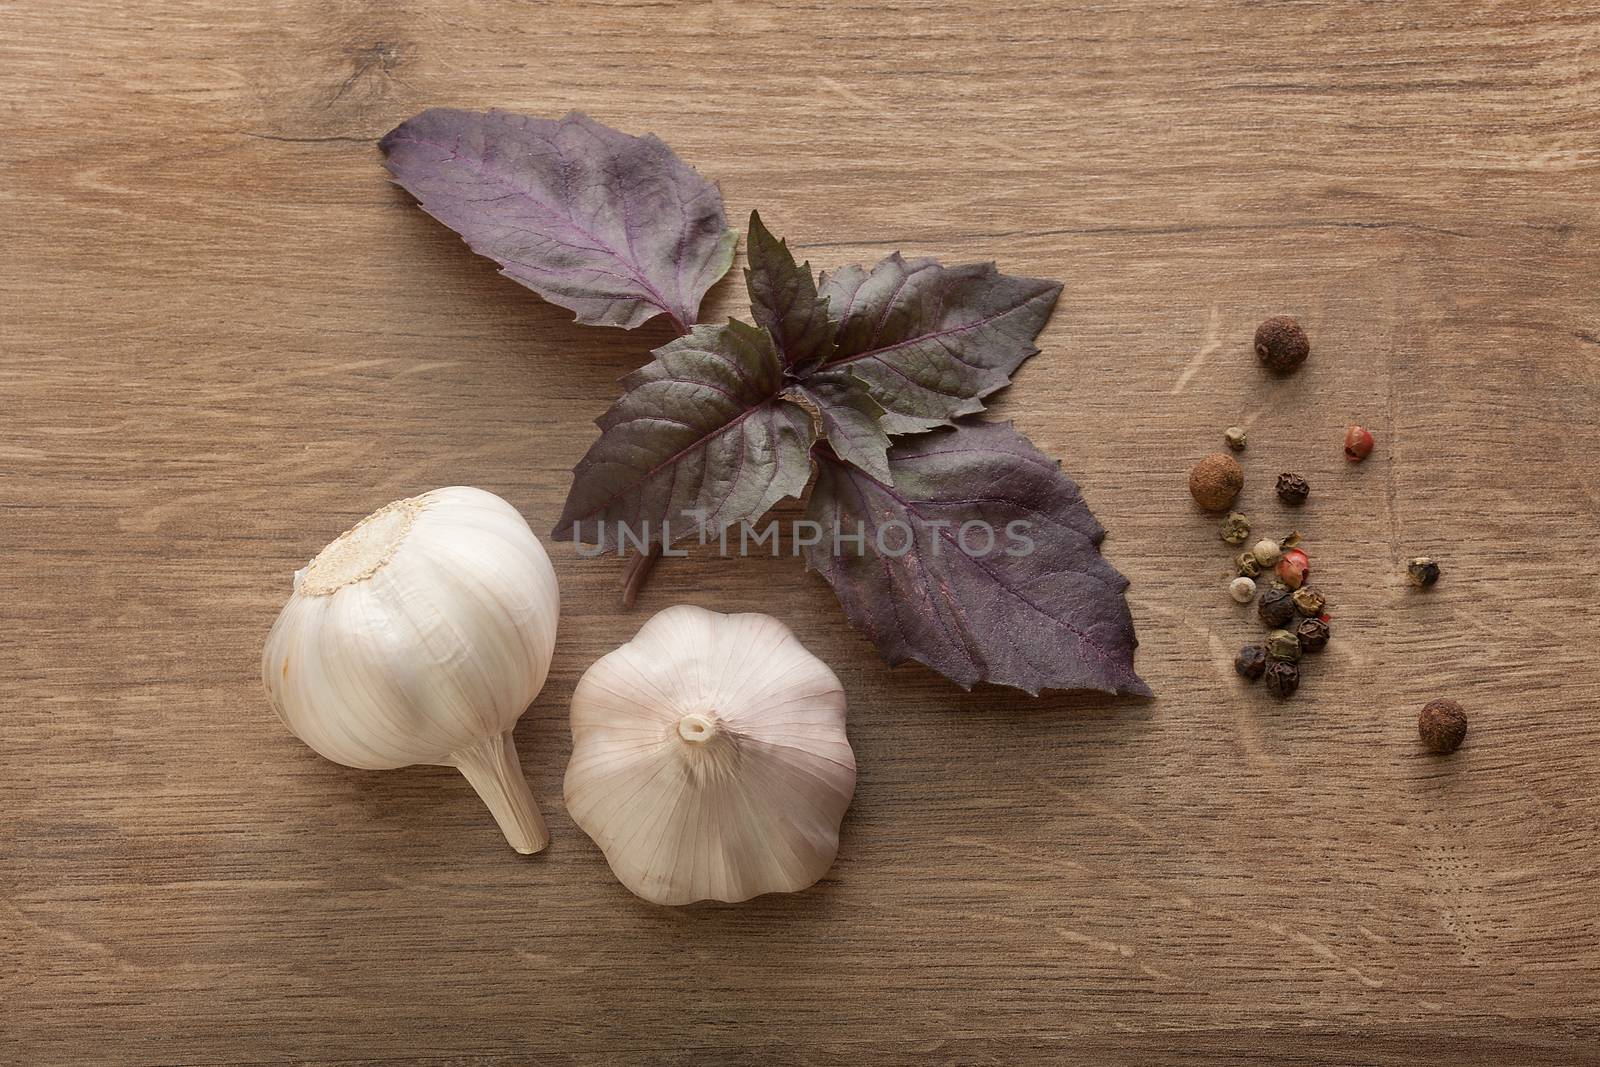 Garlic, basil and peppers on the wooden table by Angorius